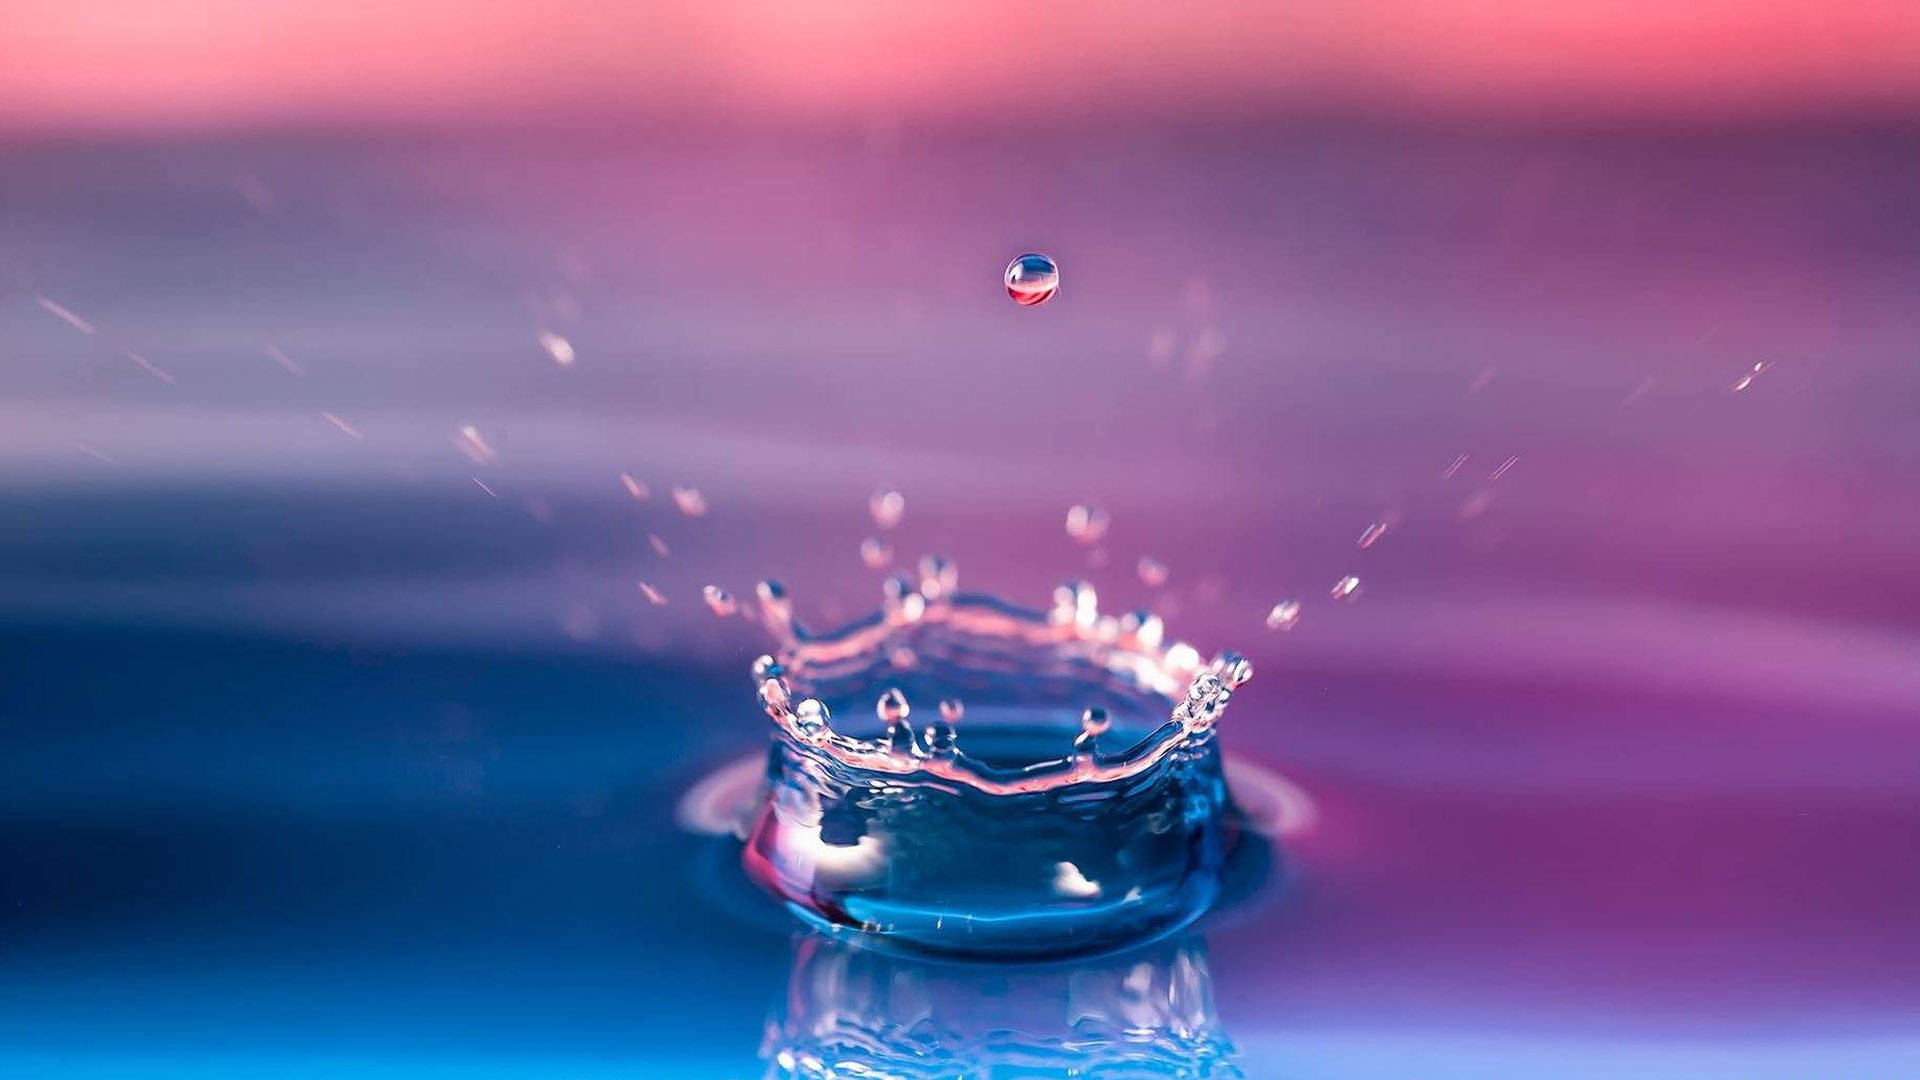 Cool 3D Water Droplet With Splash Wallpaper